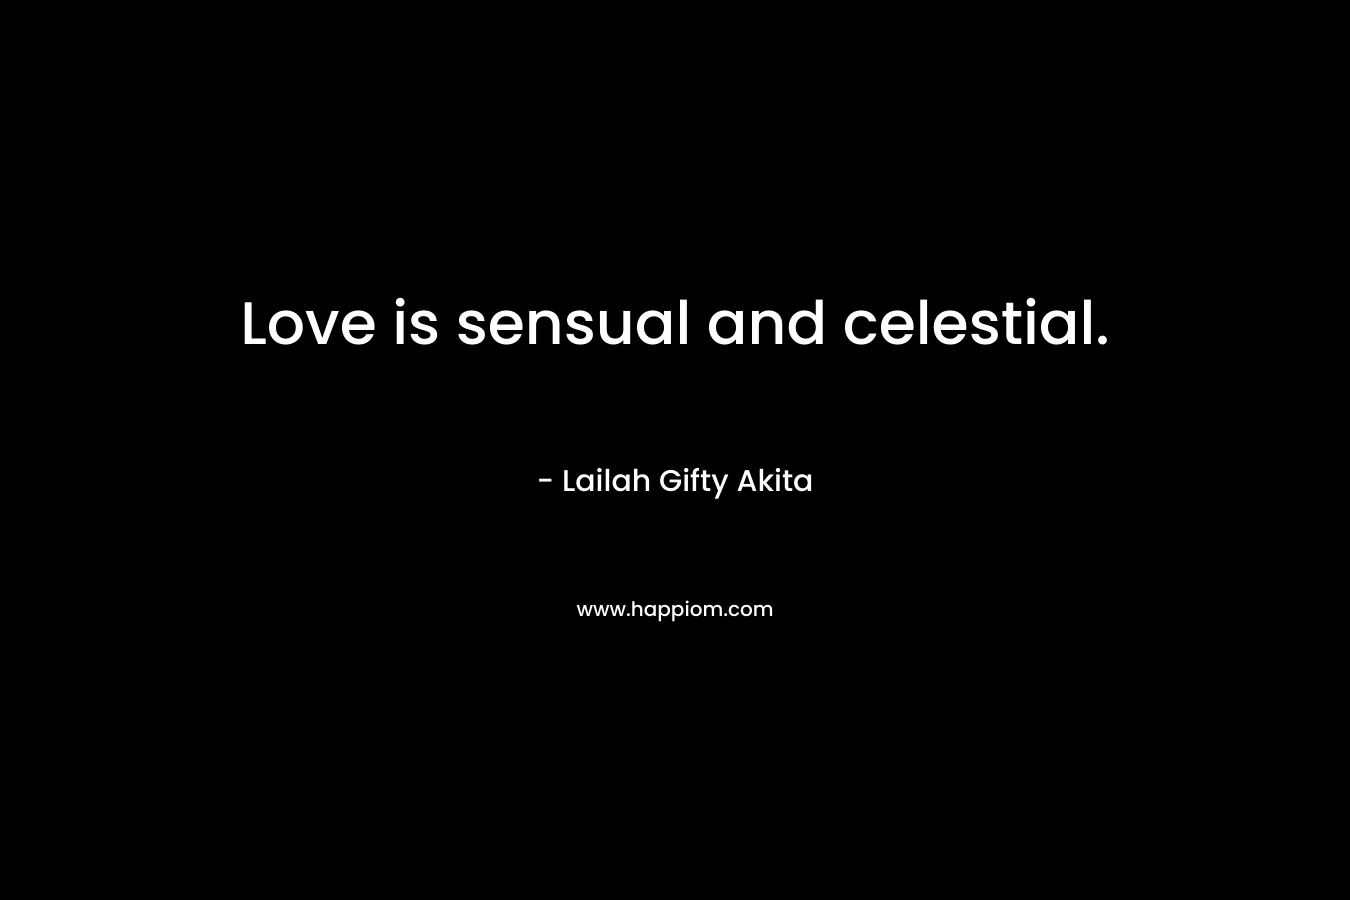 Love is sensual and celestial.